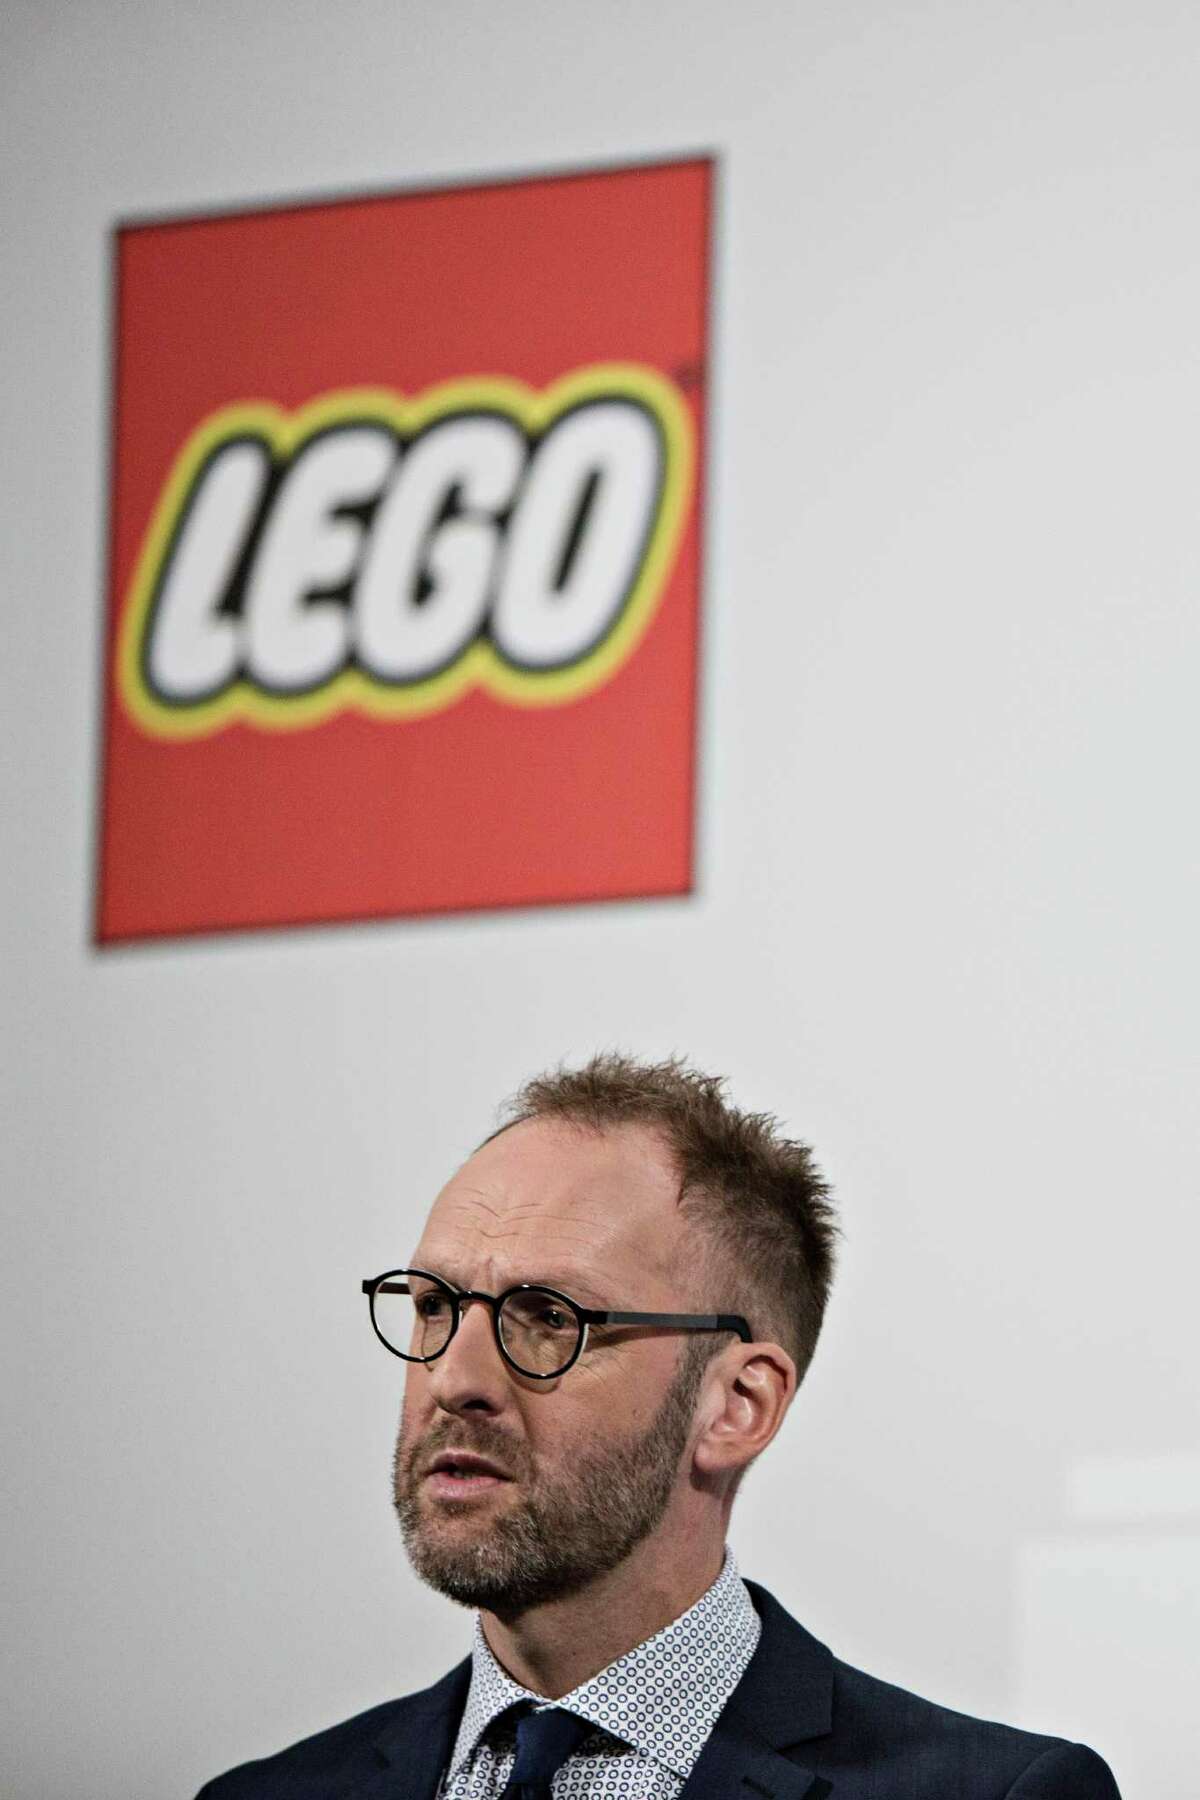 svinge Maestro træfning Longtime Lego CEO to be replaced next year